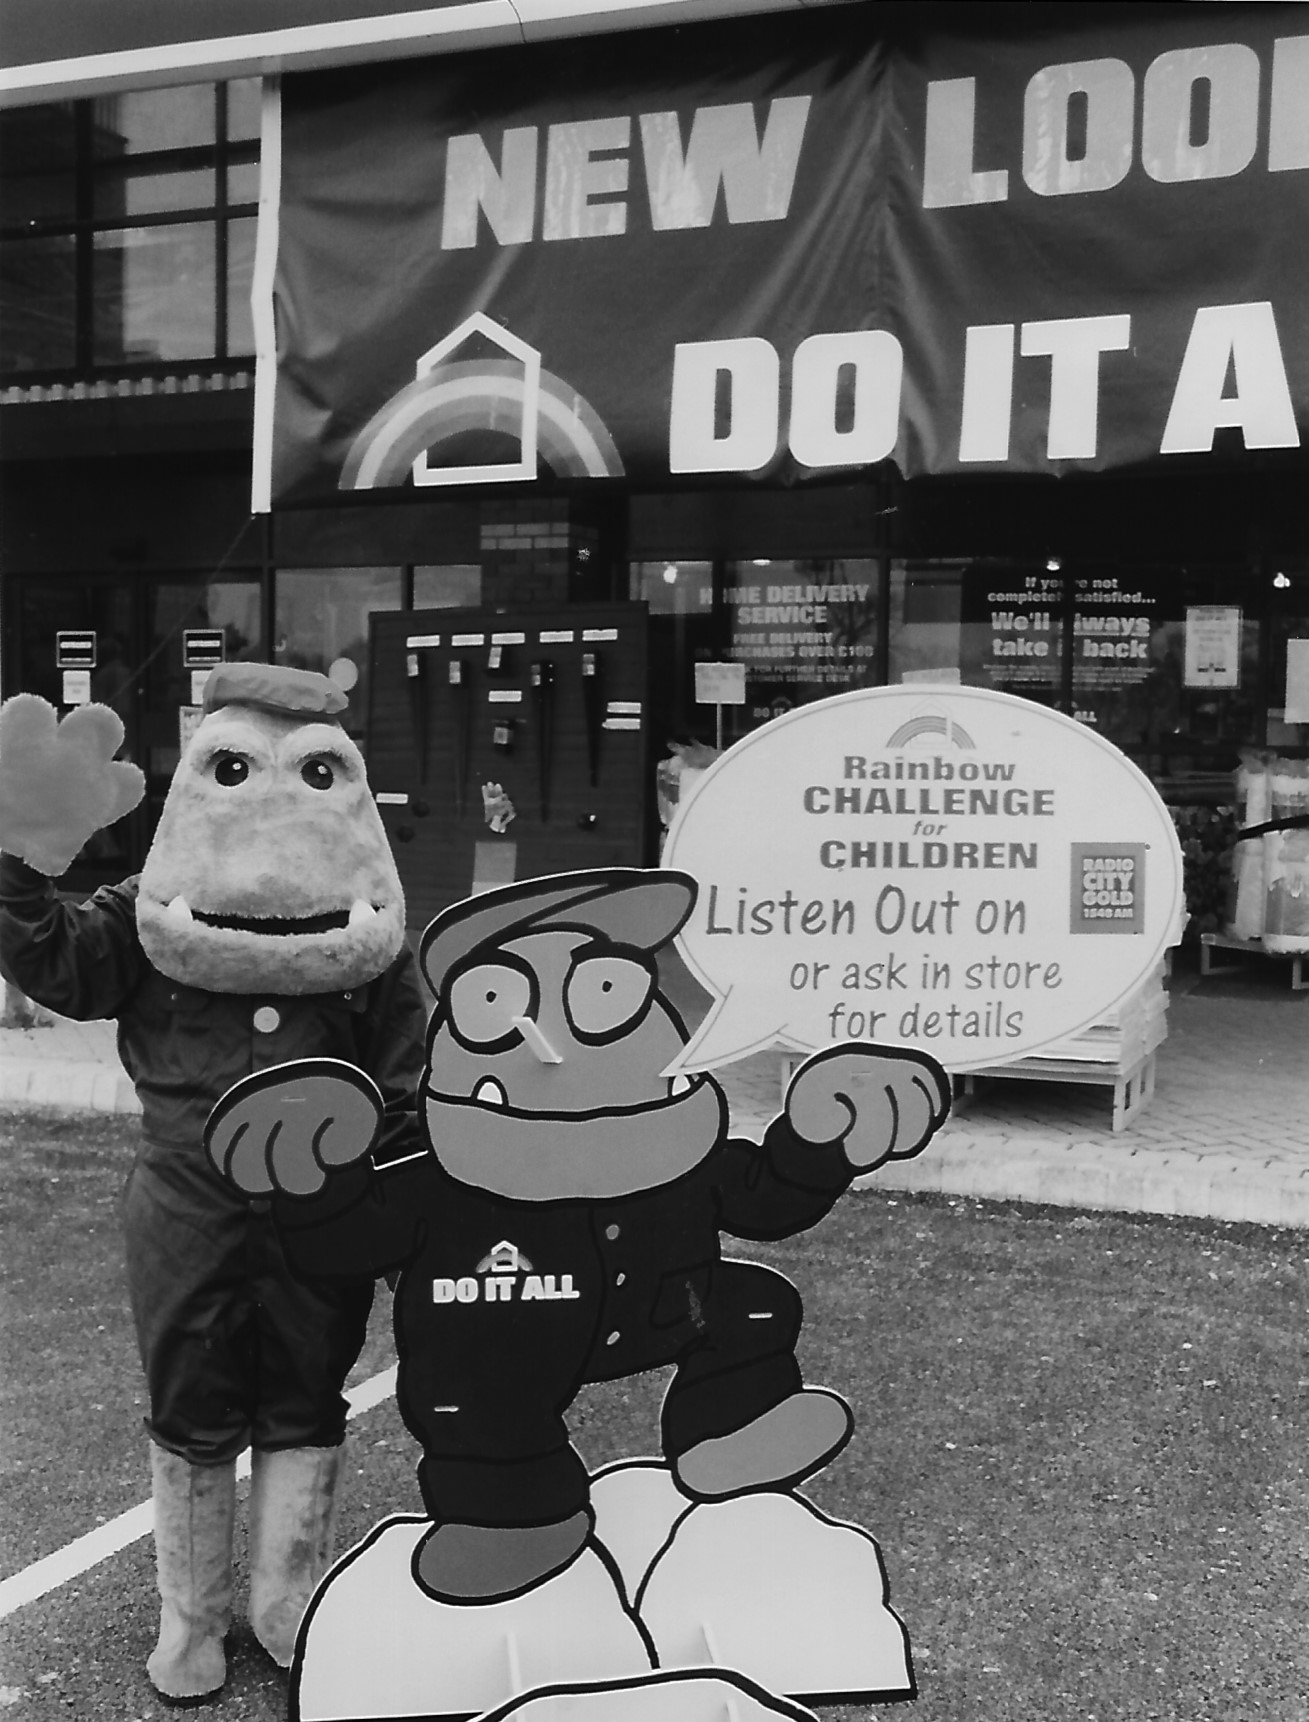 Southport in November 1994. The former New Look Do It All store in Southport, with two characters promoting a Rainbow Challenge for Children event